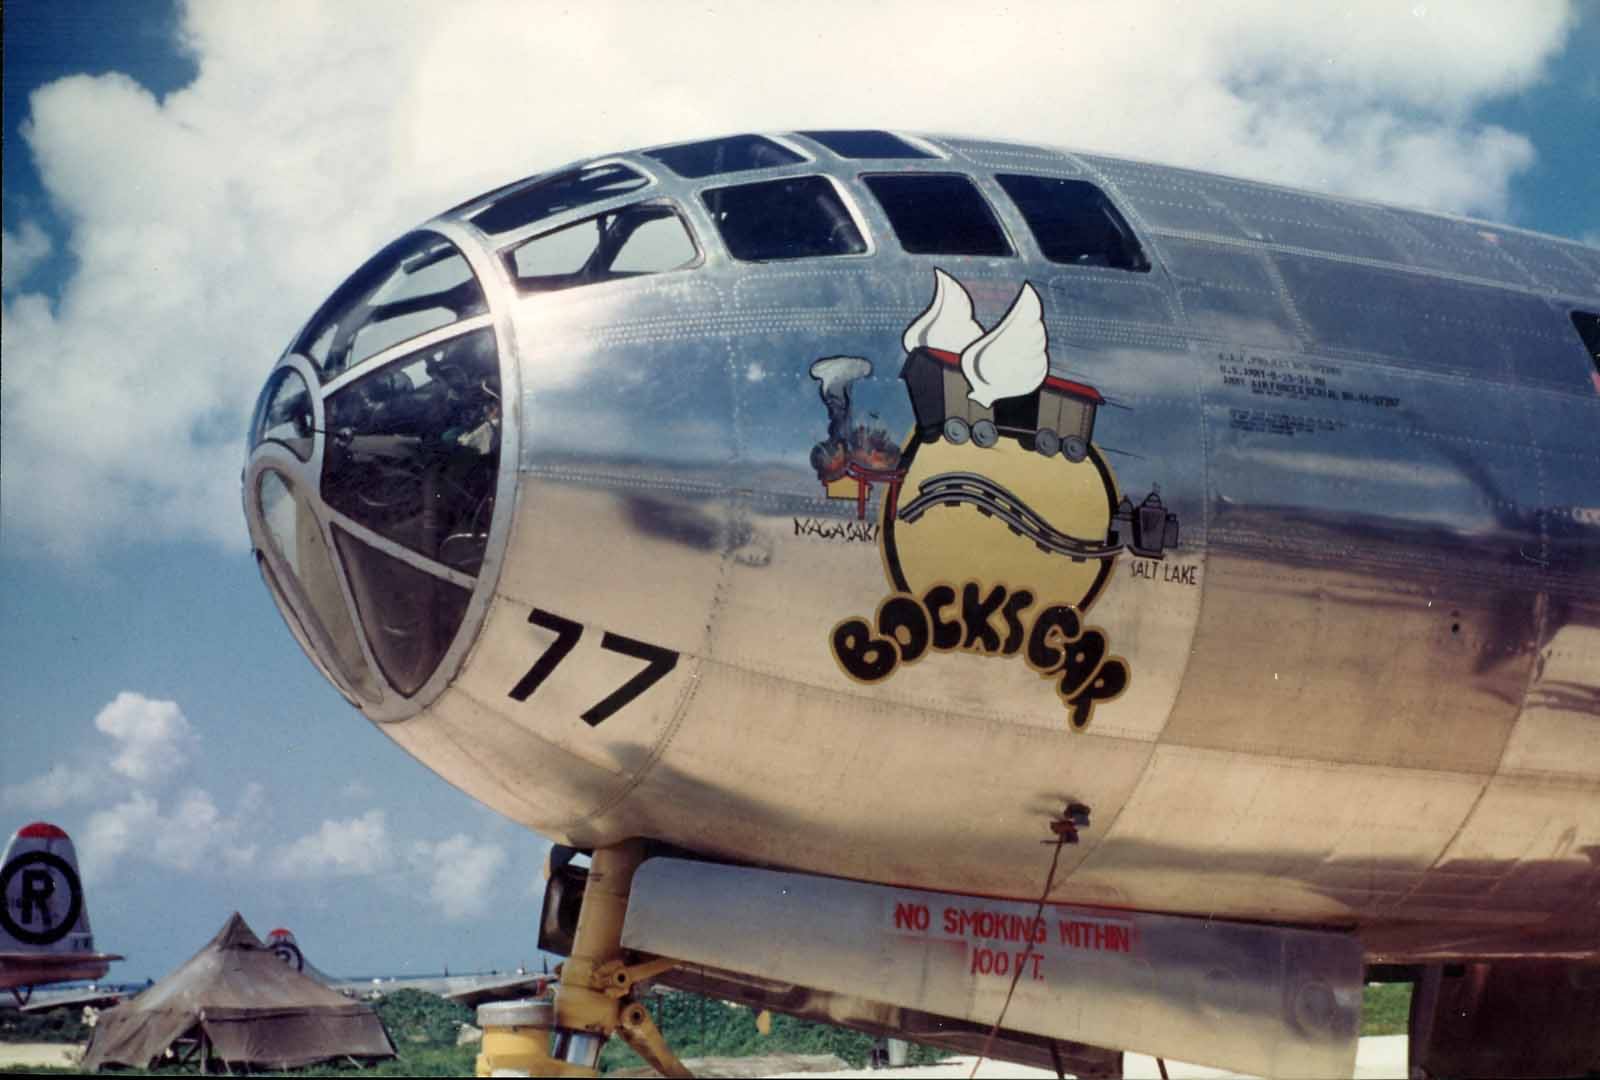 B-29 44-27297 on Tinian Island, August 1945. The nose art was applied to the airplane after the August 9, 1945 bombing mission. (U.S. Air Force)